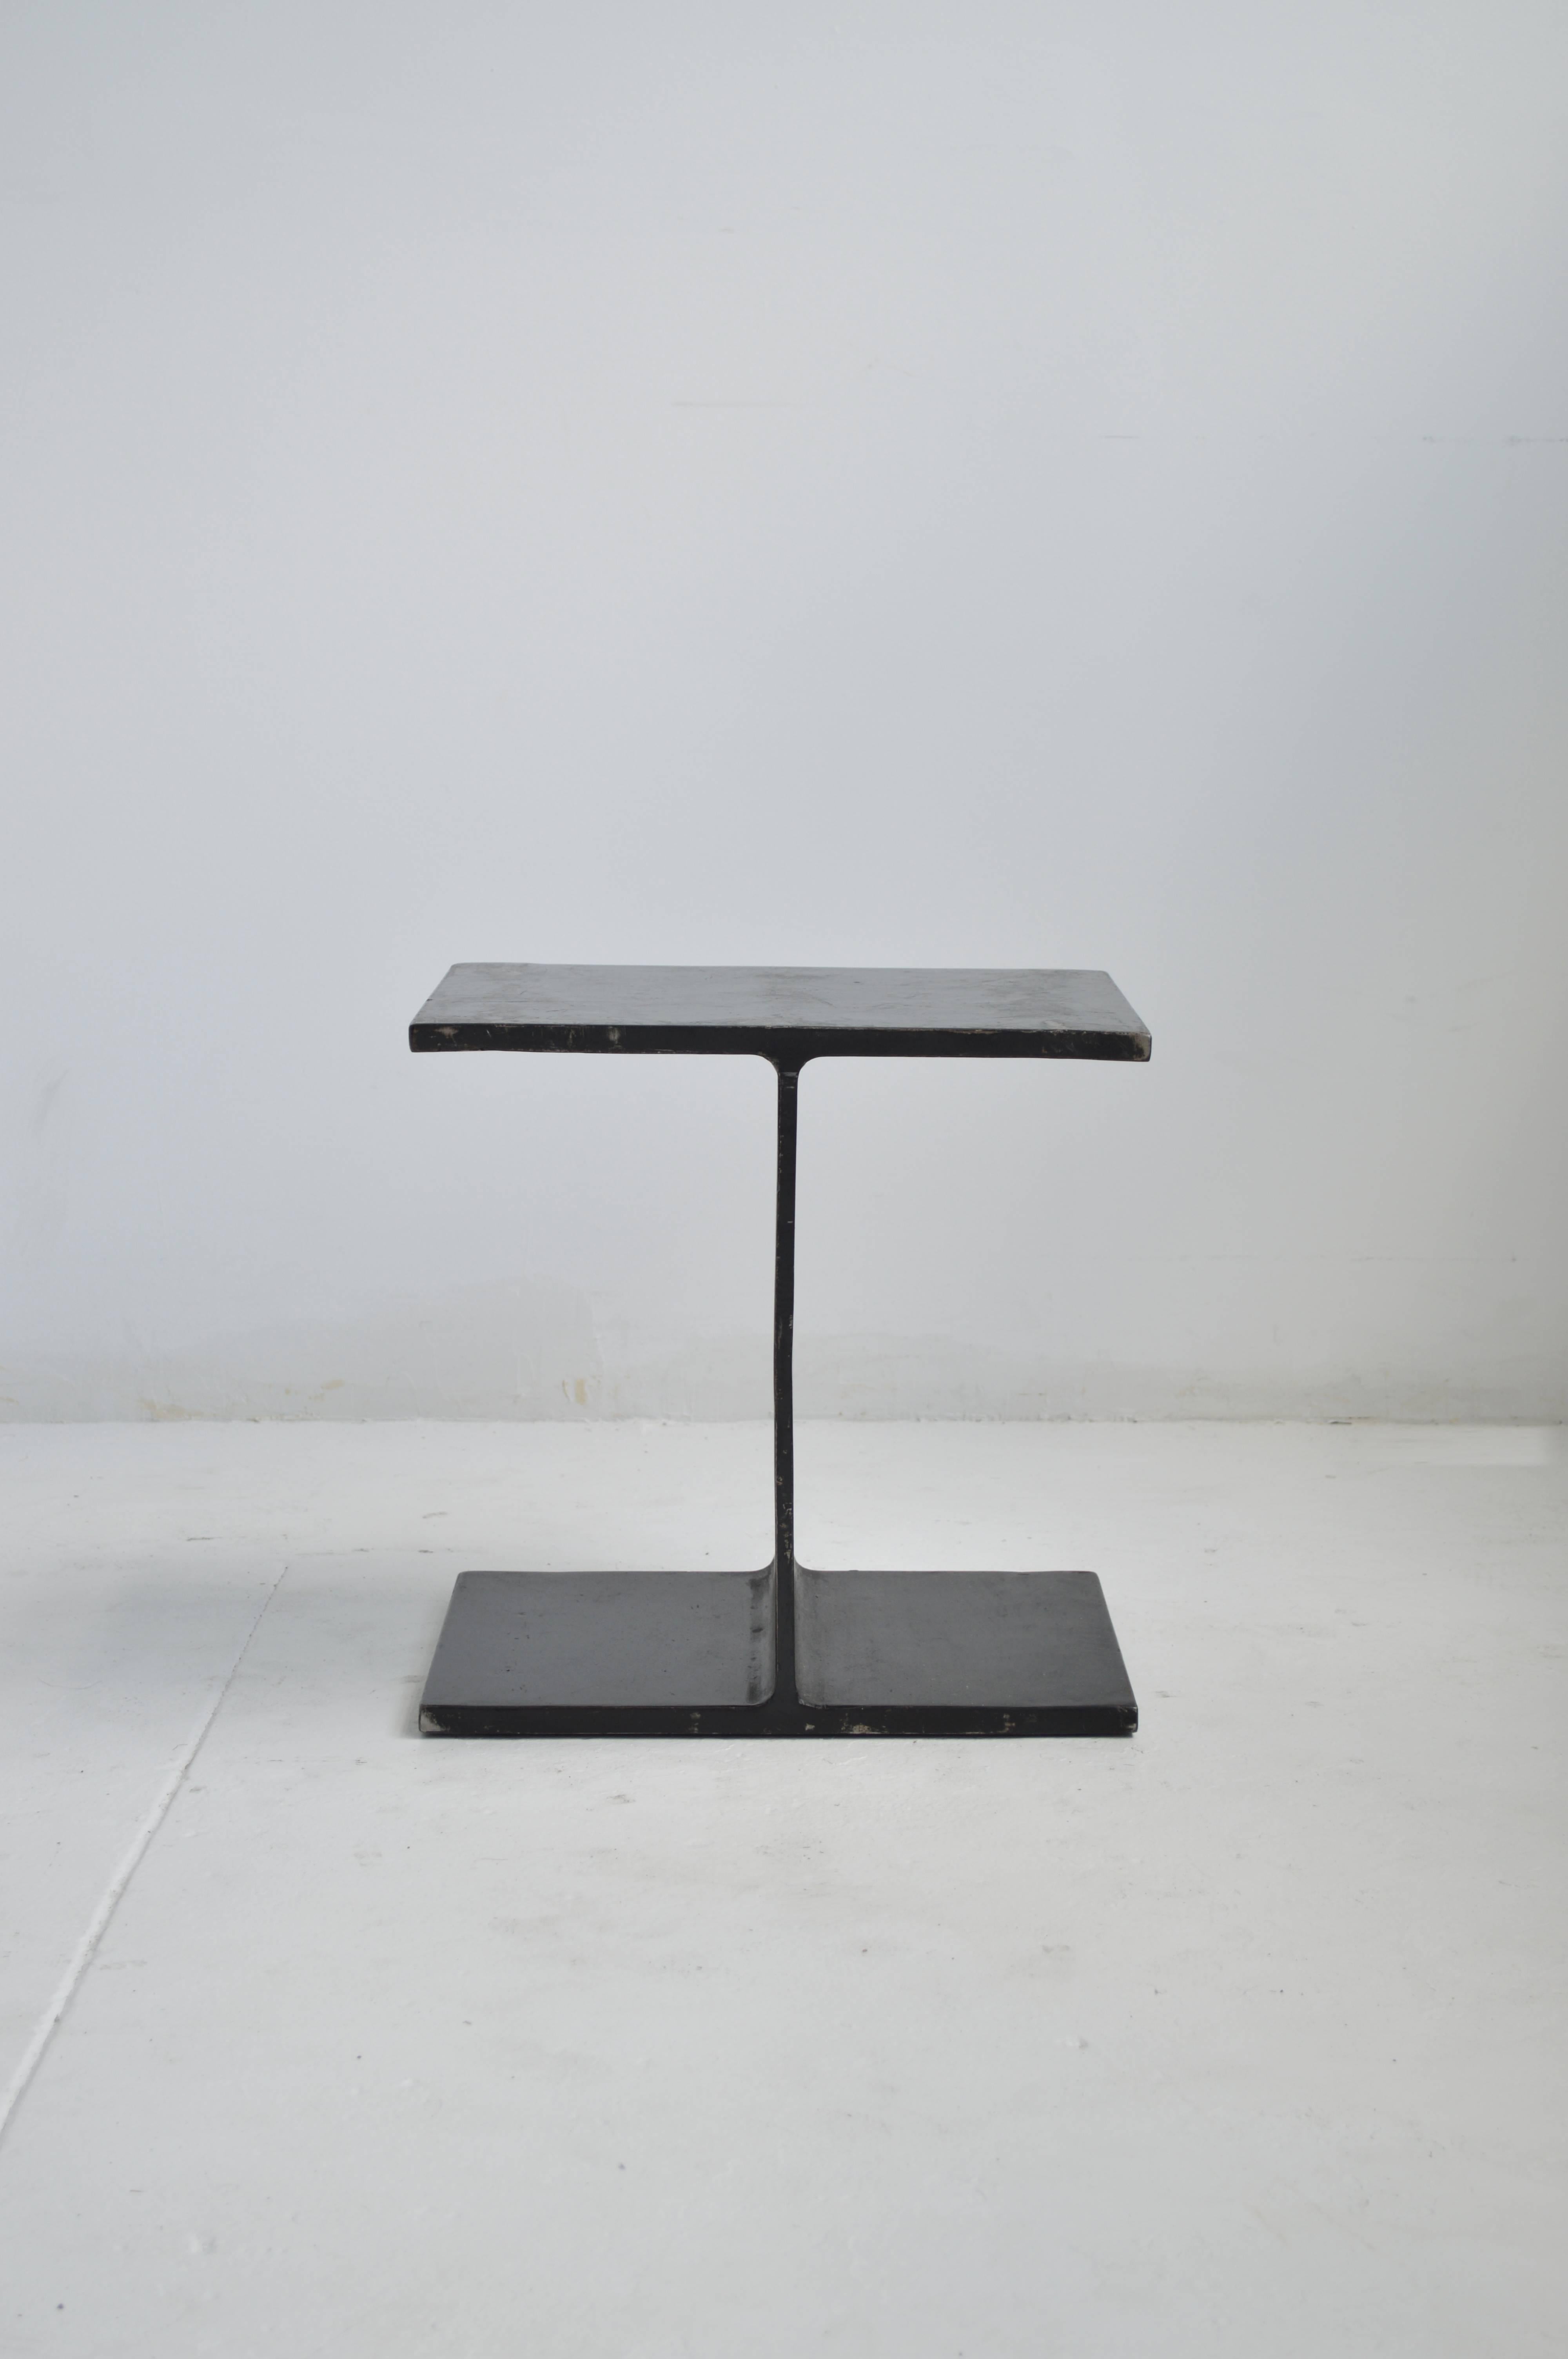 Vintage Ward Bennett black steel 'I-Beam' side table with a lovely patina and some wear to finish which adds to the beauty of the piece. This table embodies the aesthetic of the iconic American designer and is a tribute to his fascination with